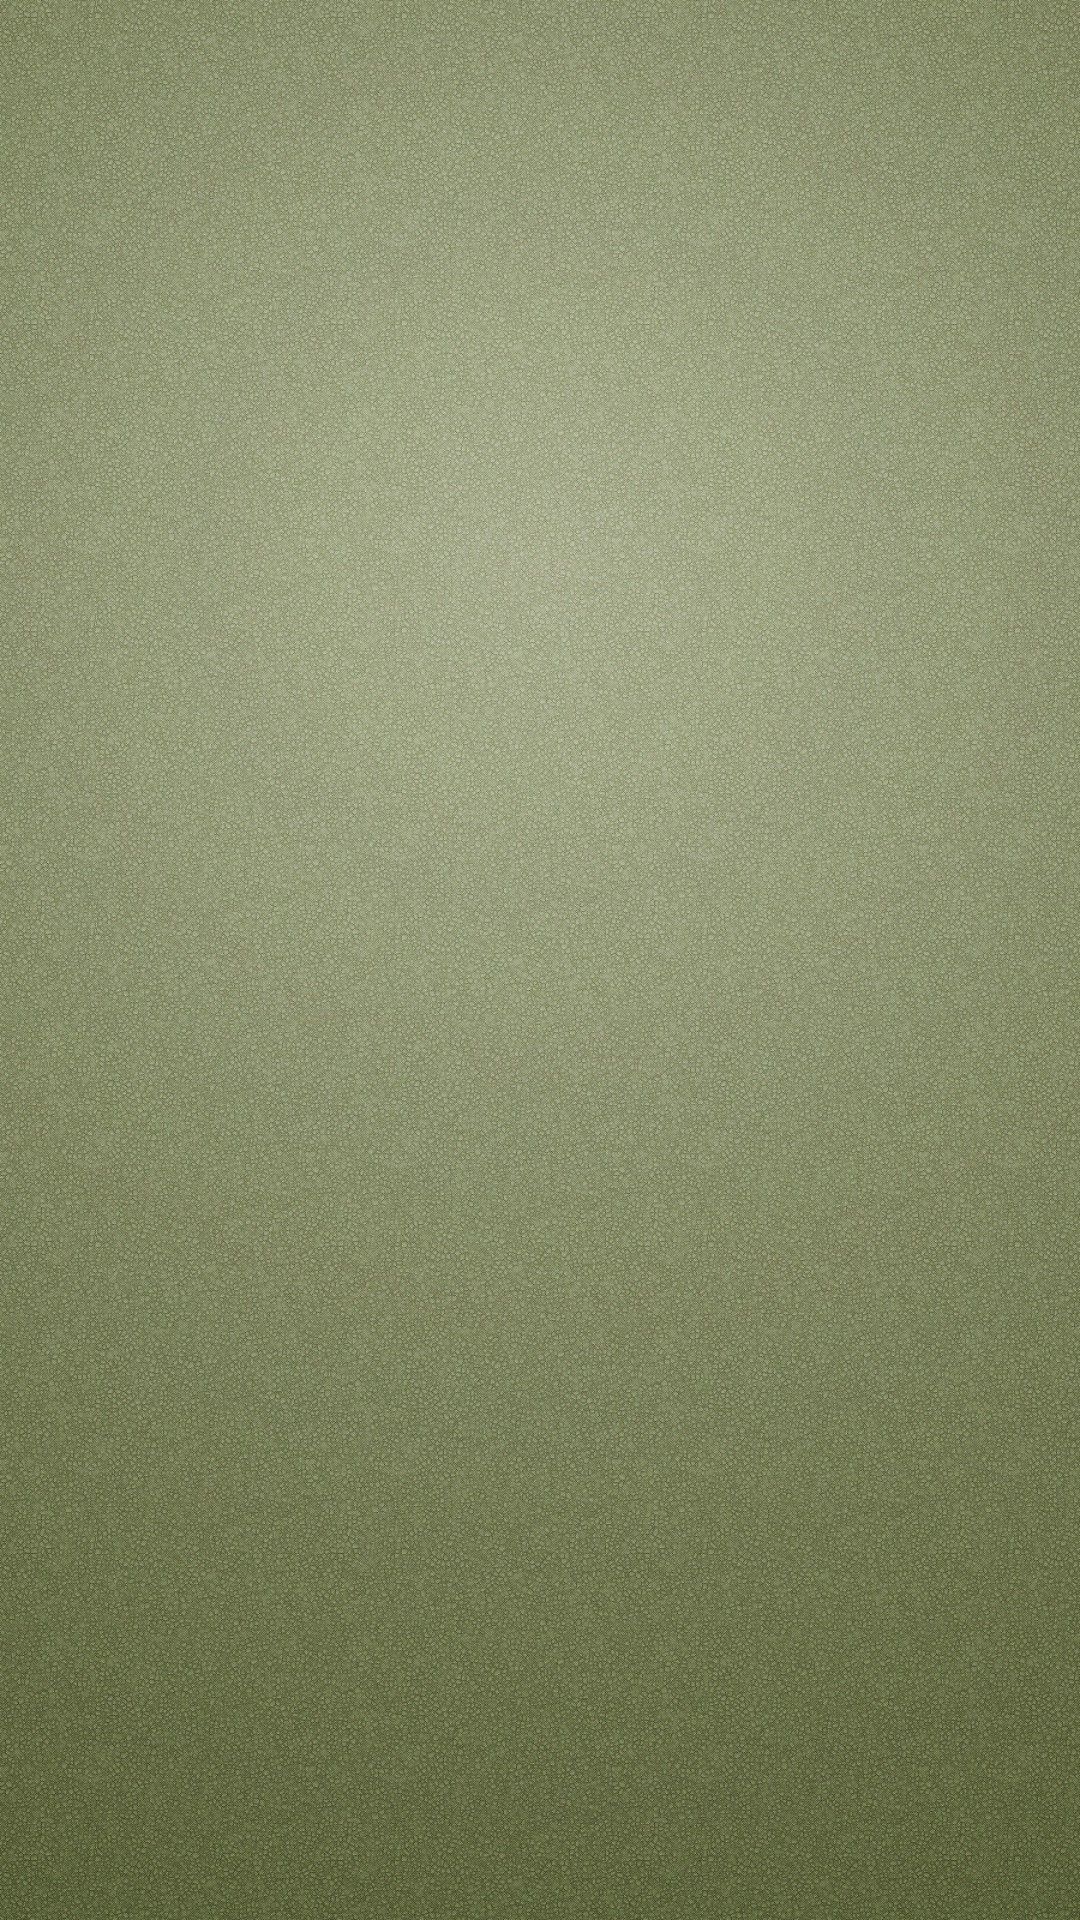 Solid Color Wallpaper For iPhone